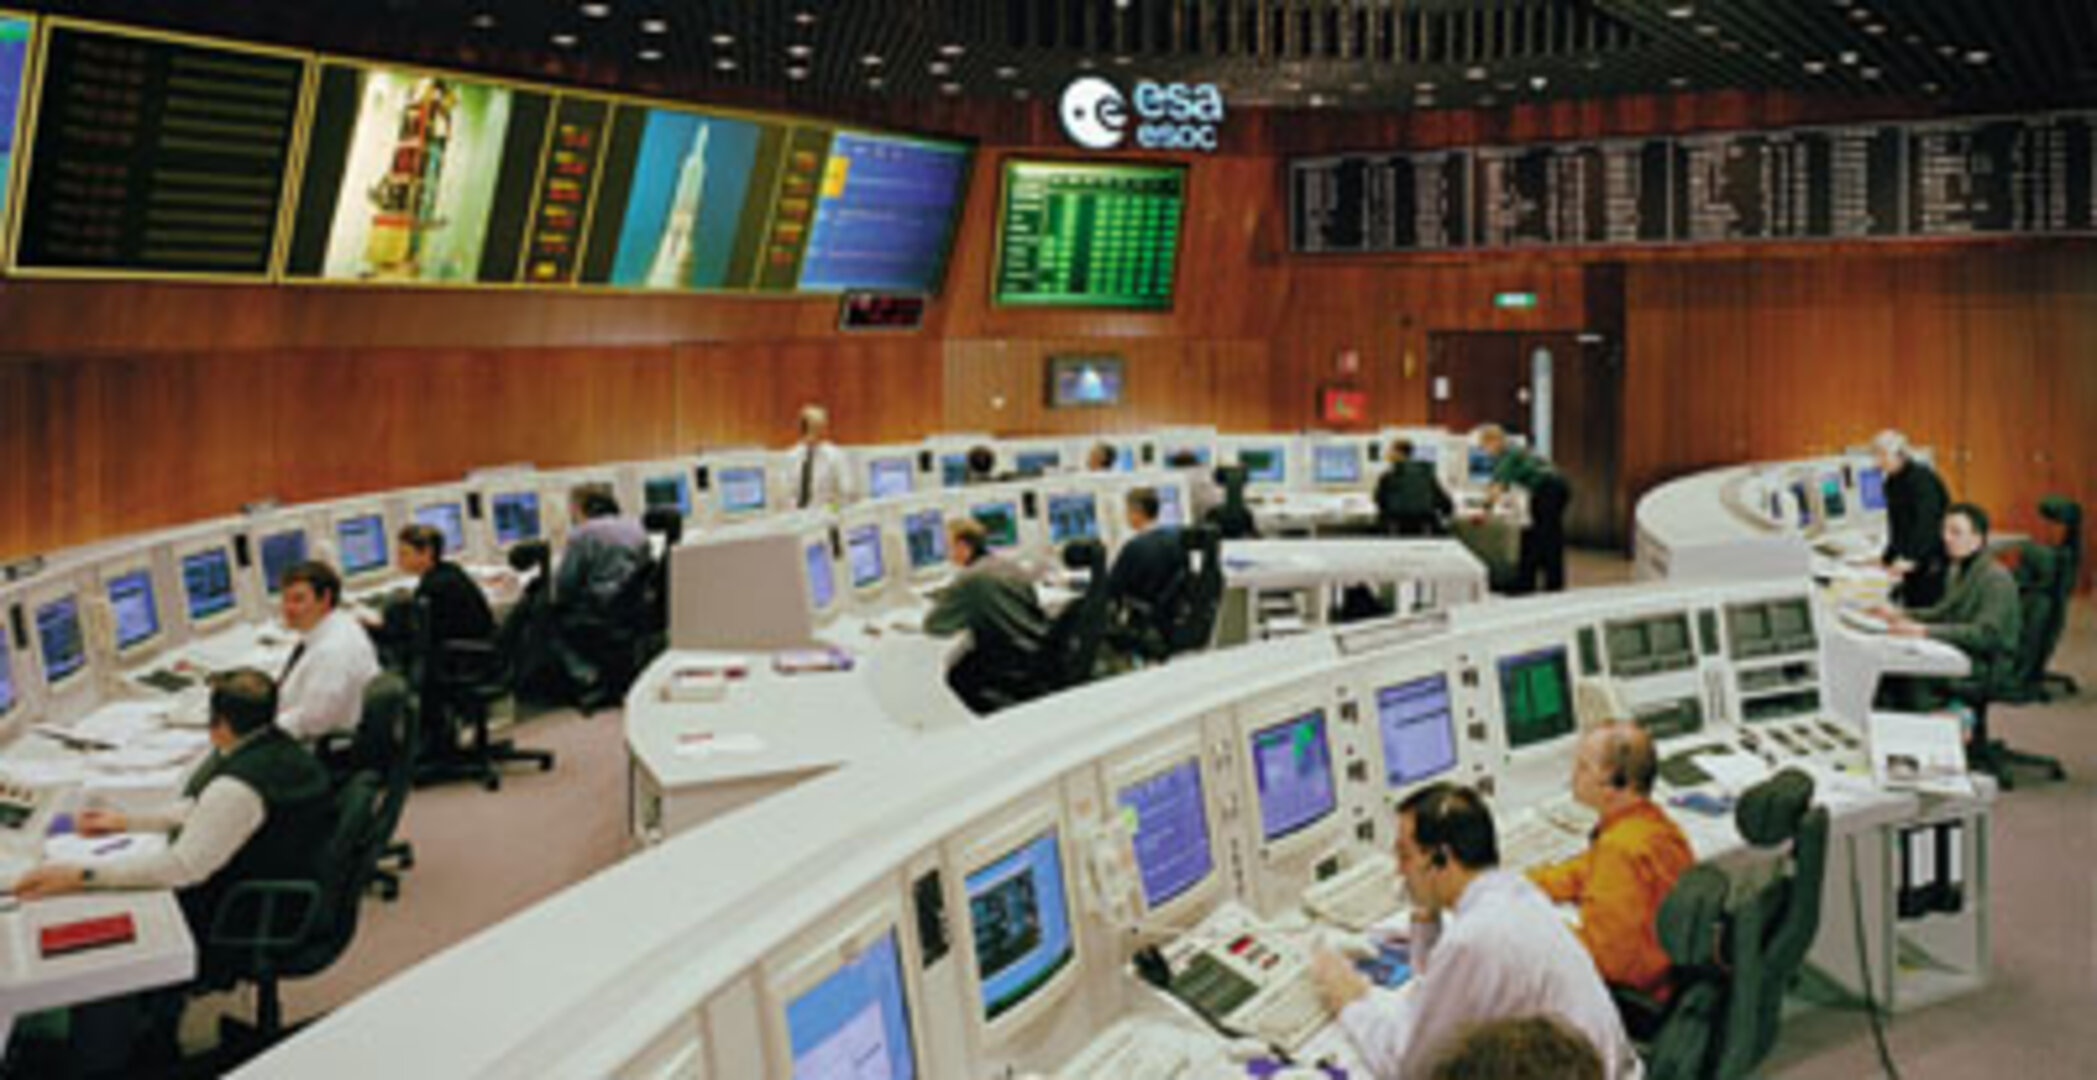 Main Control Room at ESOC, Darmstadt, Germany